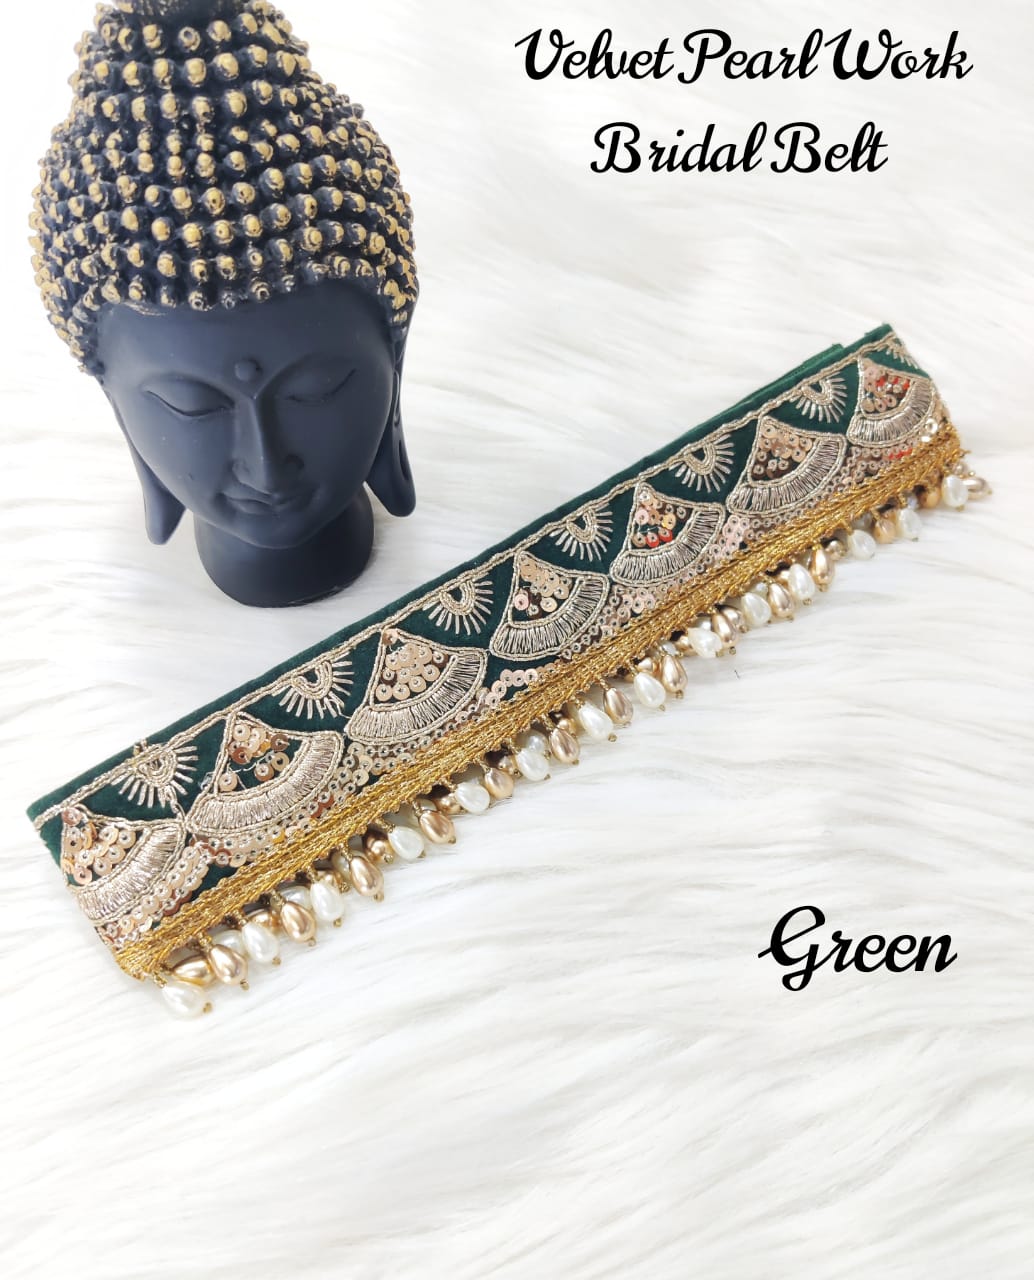 Golden Color Pearl Work Kamarband Bridal Belt / Sari Belt For Women With  Embroidery (B18)